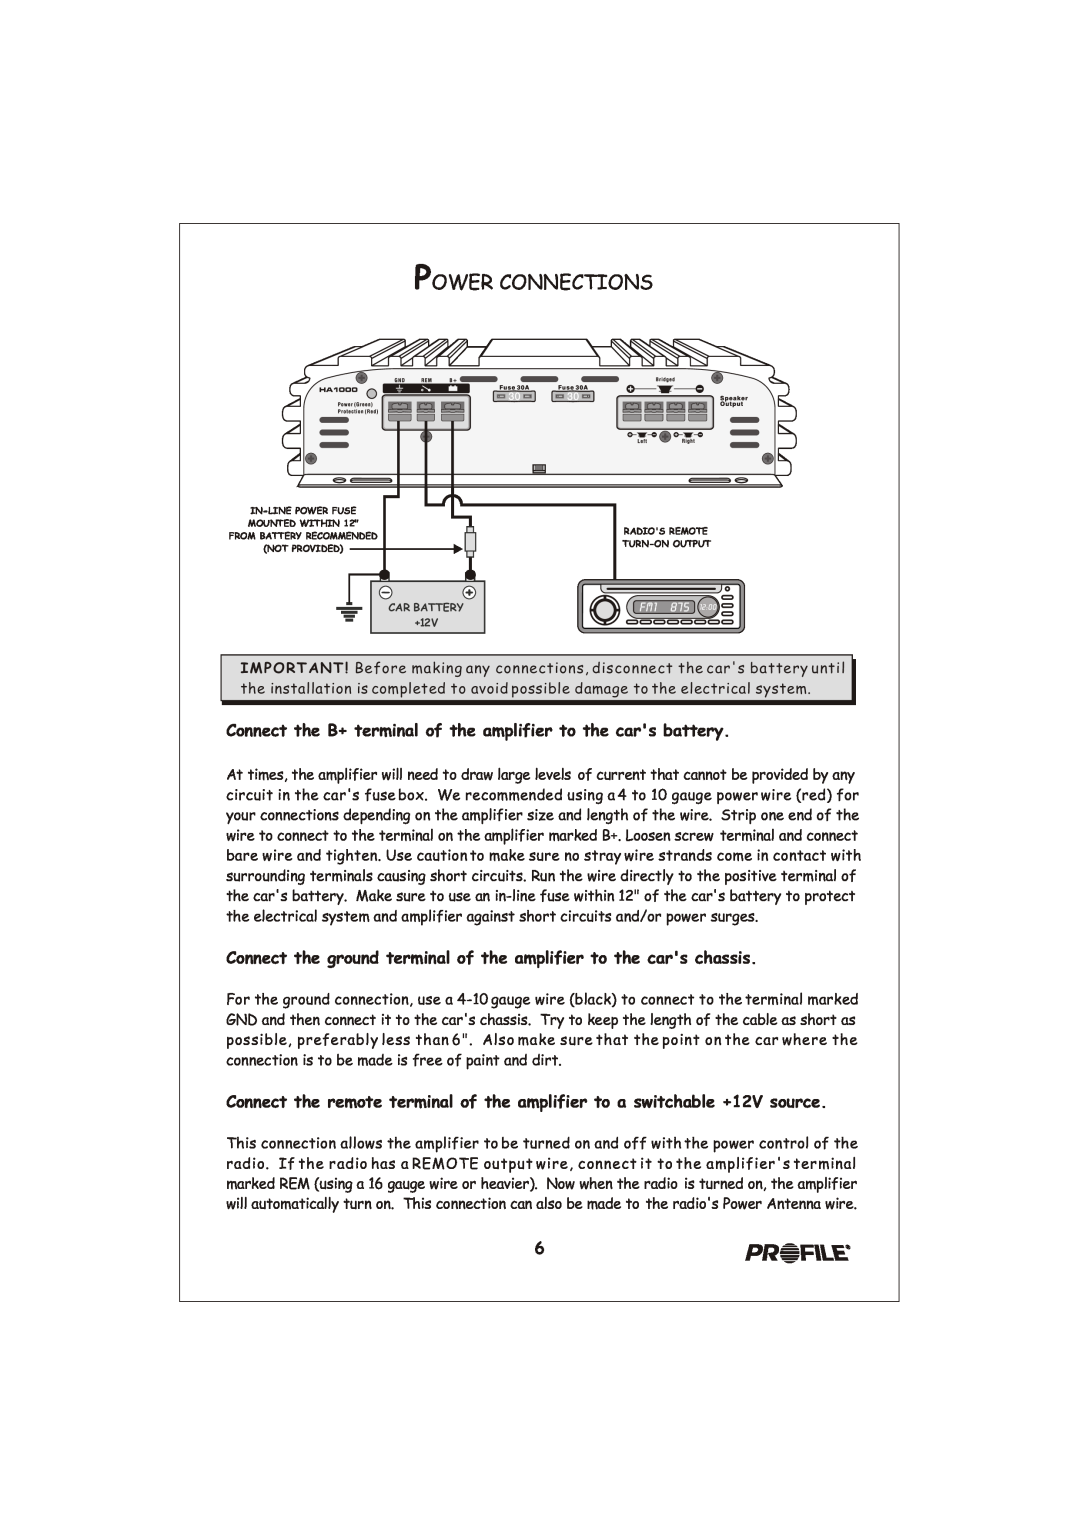 Profile HA1000 installation instructions Power Connections 